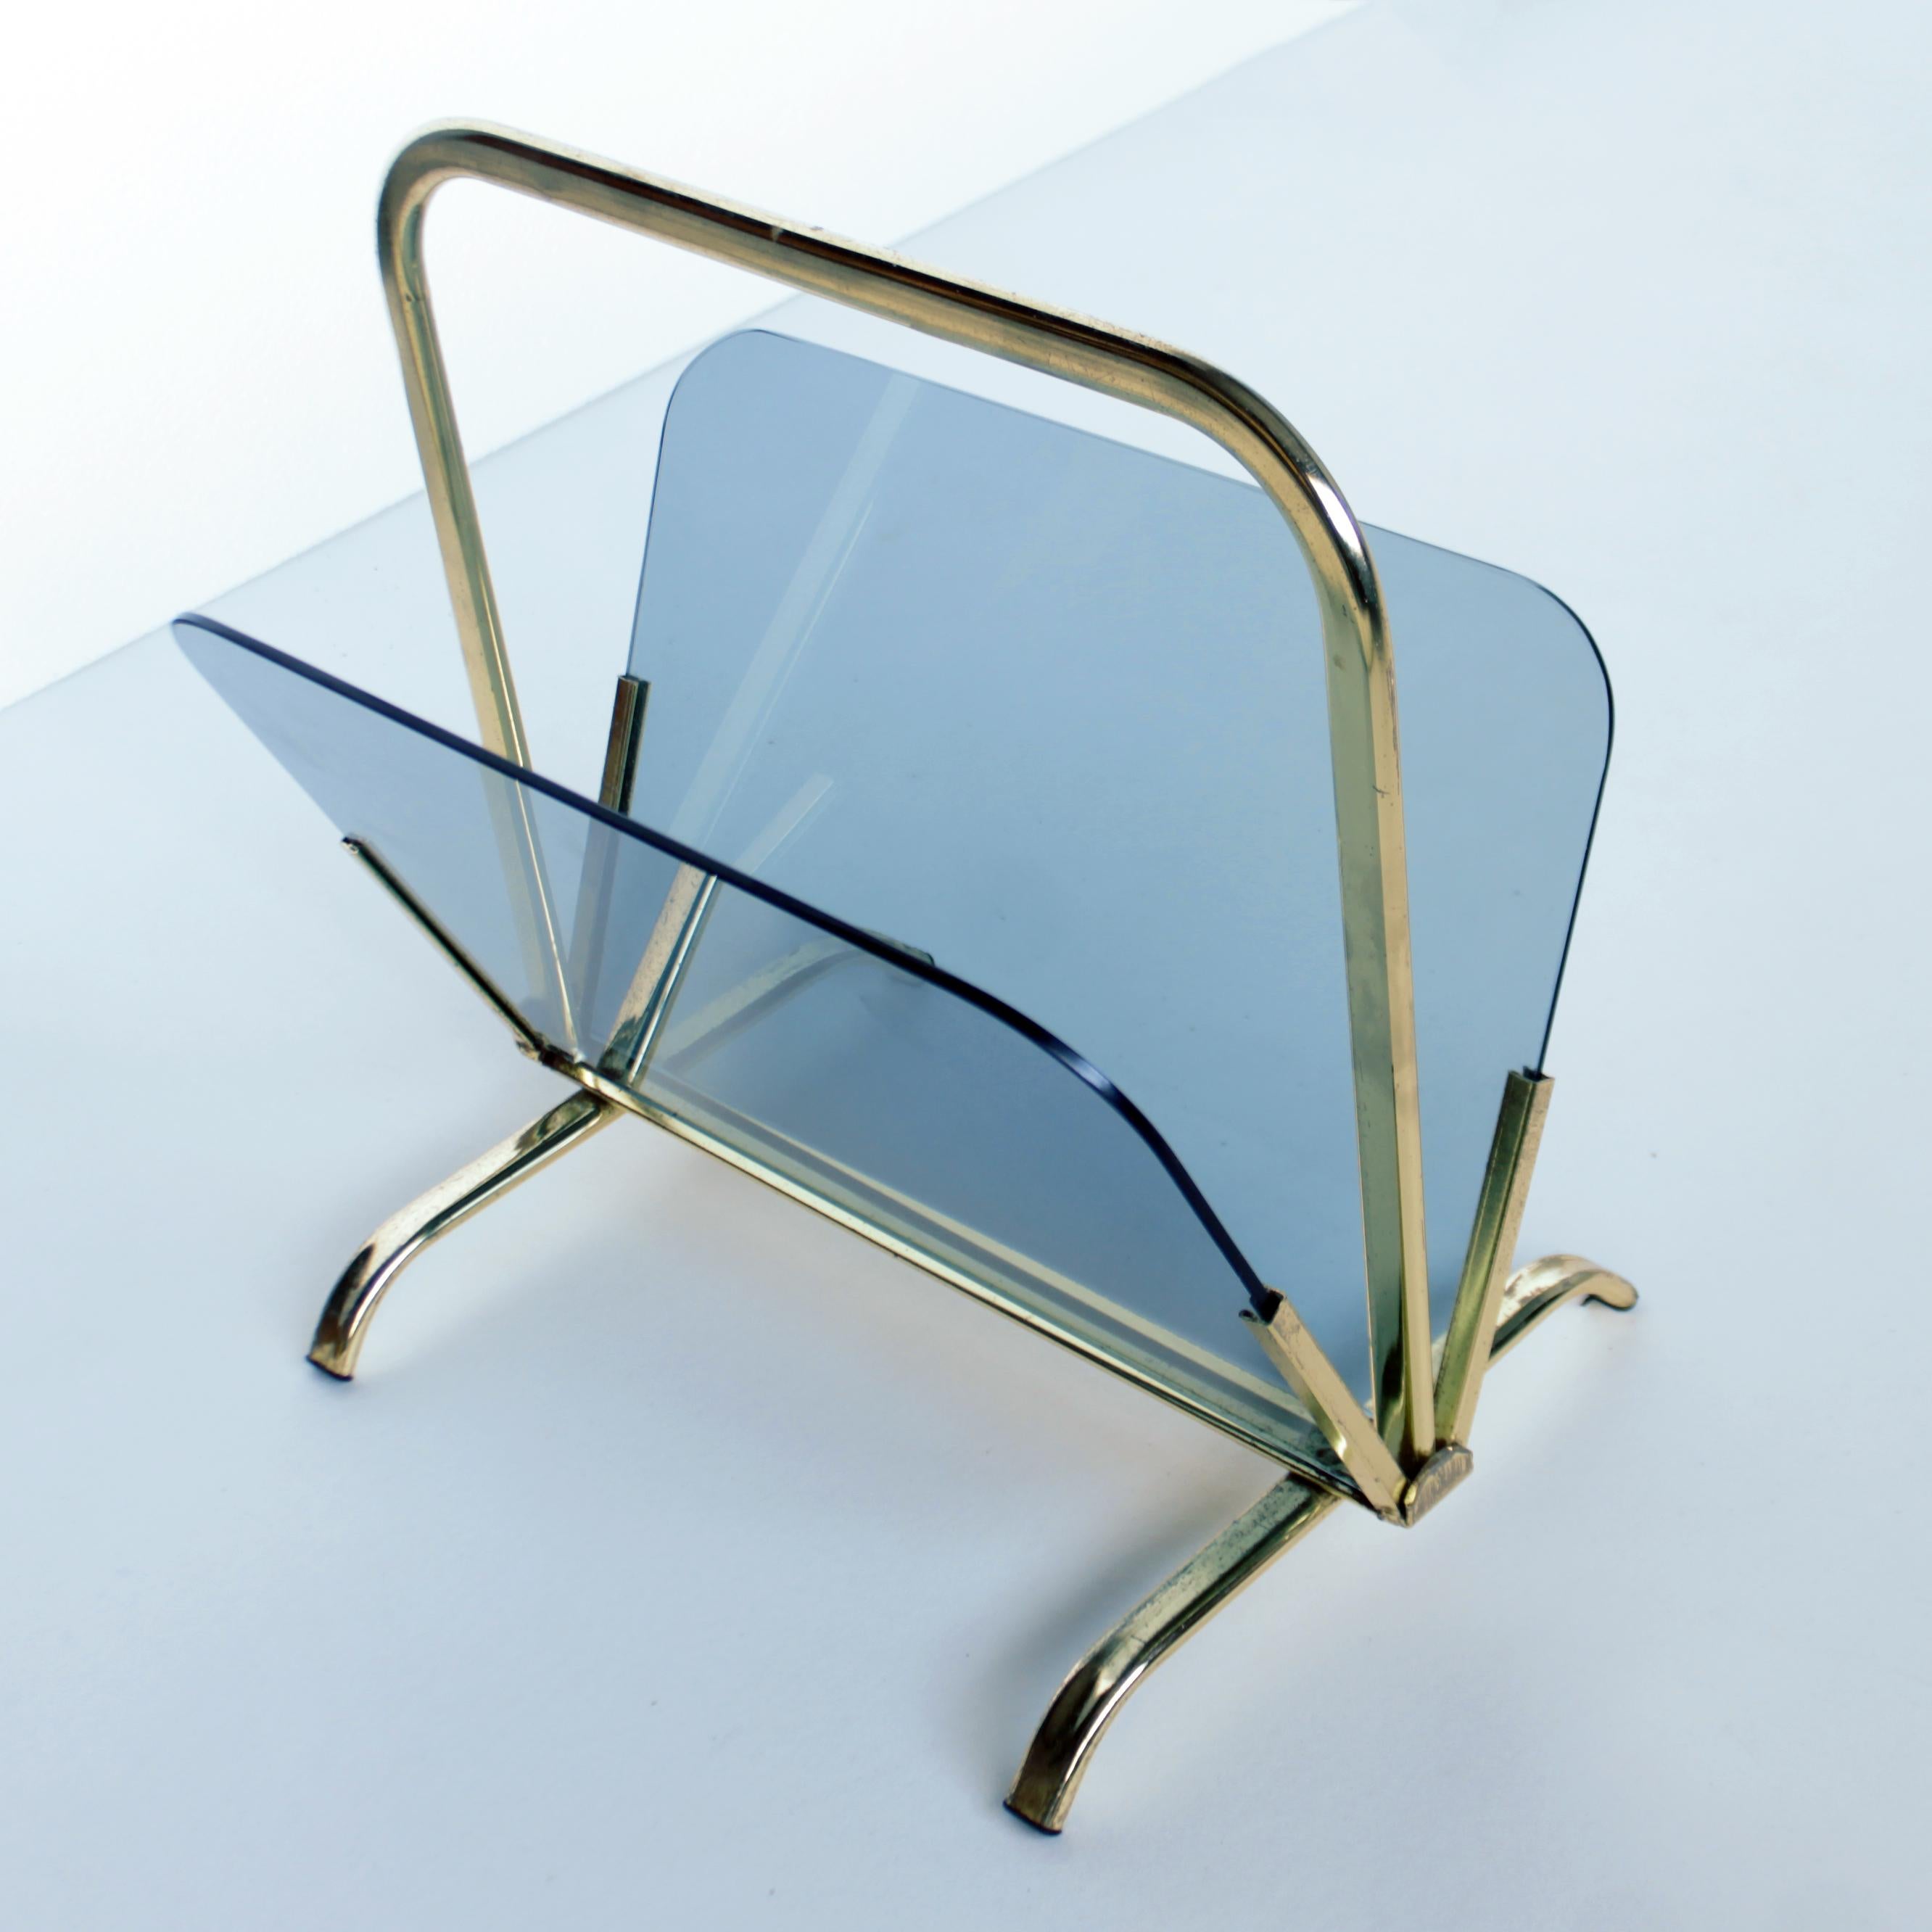 From France, a magazine rack or holder made of gilded metal and blue glass in the style of Fontana Arte. Timelessly elegant, in a 1950s style inspired by designers such as Gio Ponti and Pietro Chiesa.
Dimensions: length 15.7 inches (40 cm), width